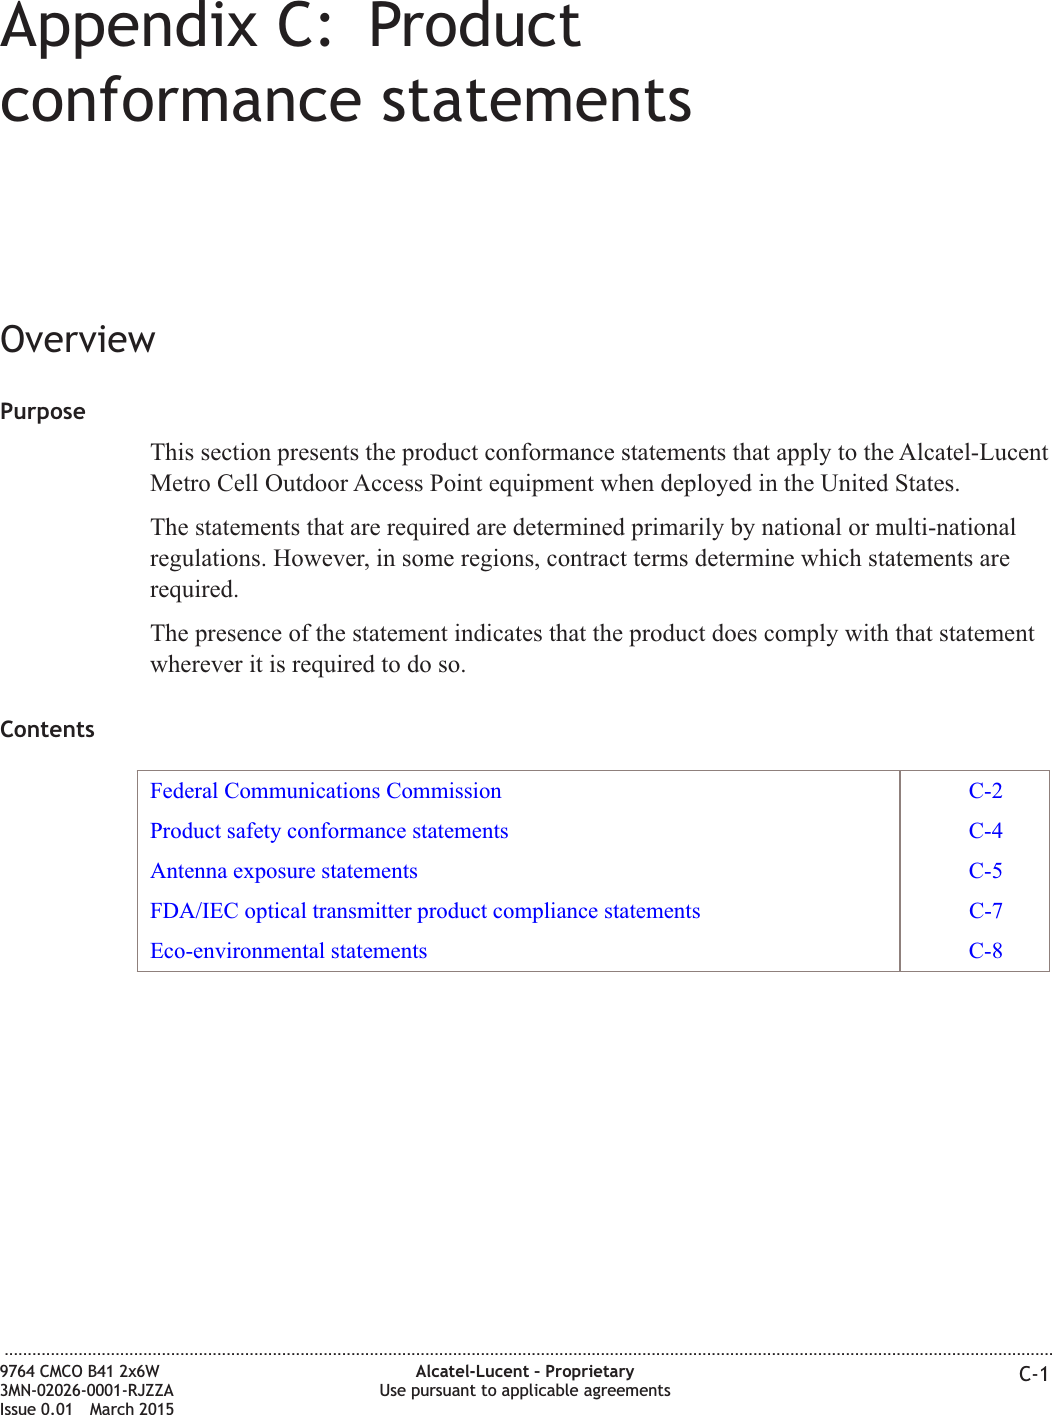 Appendix C: Productconformance statementsOverviewPurposeThis section presents the product conformance statements that apply to the Alcatel-LucentMetro Cell Outdoor Access Point equipment when deployed in the United States.The statements that are required are determined primarily by national or multi-nationalregulations. However, in some regions, contract terms determine which statements arerequired.The presence of the statement indicates that the product does comply with that statementwherever it is required to do so.ContentsFederal Communications Commission C-2Product safety conformance statements C-4Antenna exposure statements C-5FDA/IEC optical transmitter product compliance statements C-7Eco-environmental statements C-8...................................................................................................................................................................................................................................9764 CMCO B41 2x6W3MN-02026-0001-RJZZAIssue 0.01 March 2015Alcatel-Lucent – ProprietaryUse pursuant to applicable agreements C-1DRAFTDRAFT